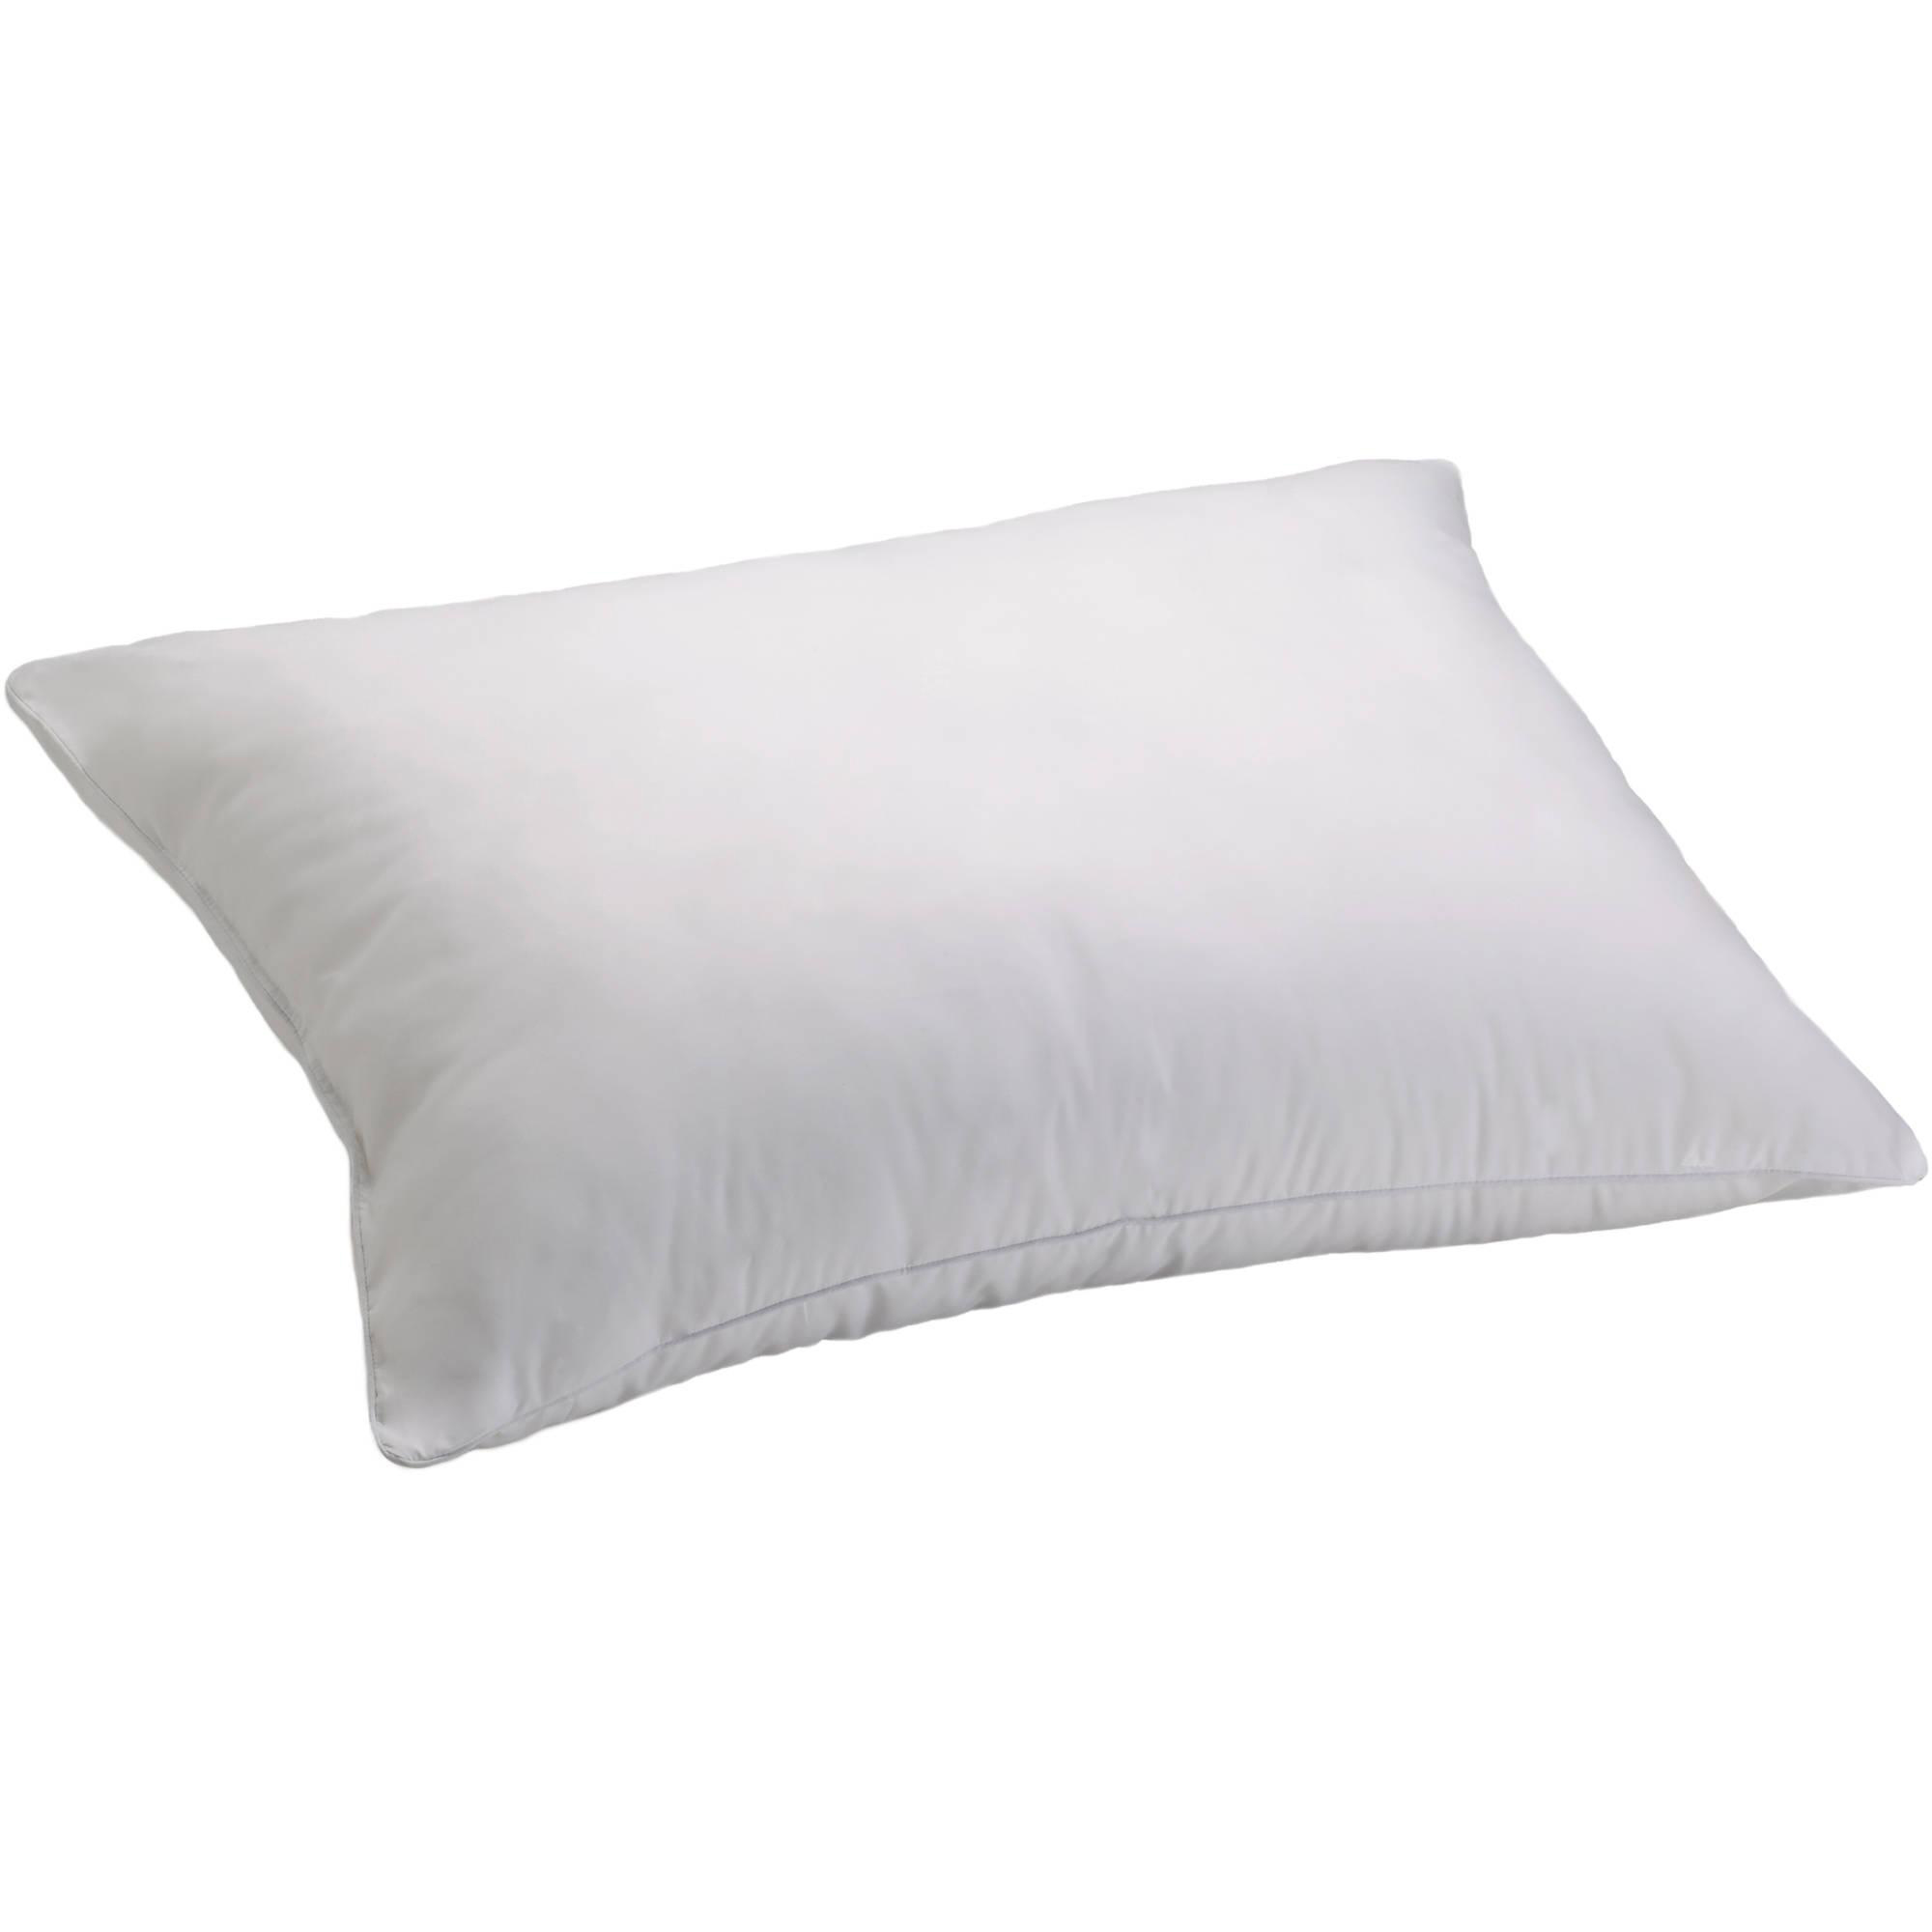 Mainstays Allergy Relief Hypoallergenic Down Alternative Pillow, 1 Each - image 1 of 2